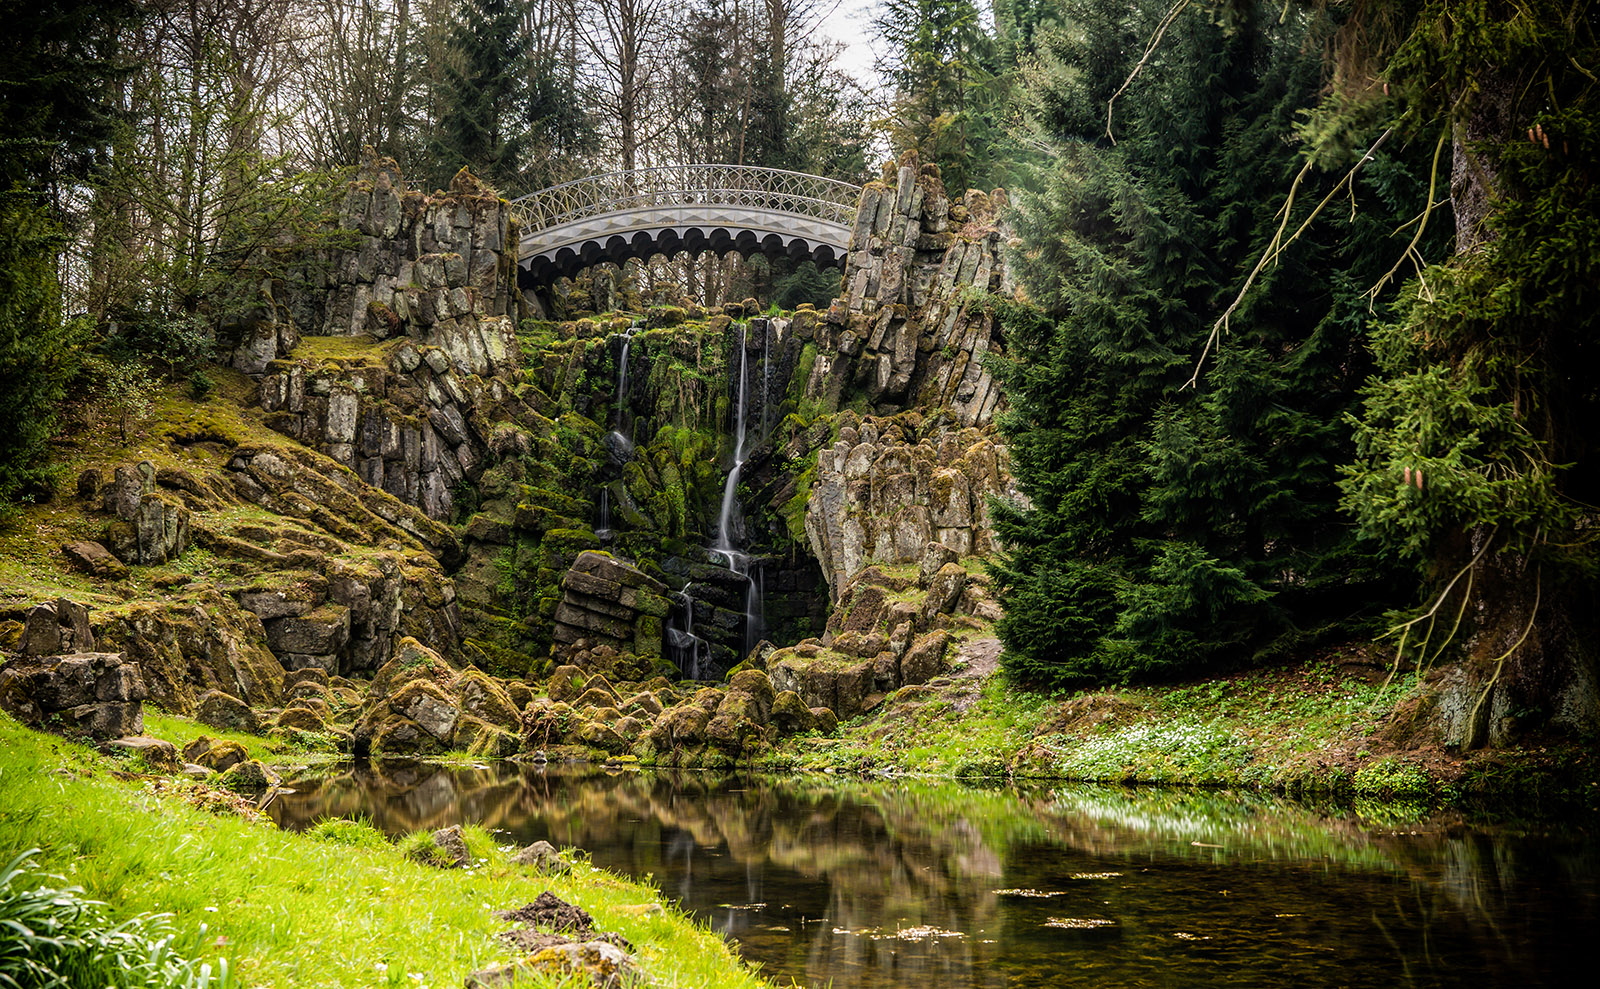  a mossy hillside and pine trees with an arched bridge crossing over a pond